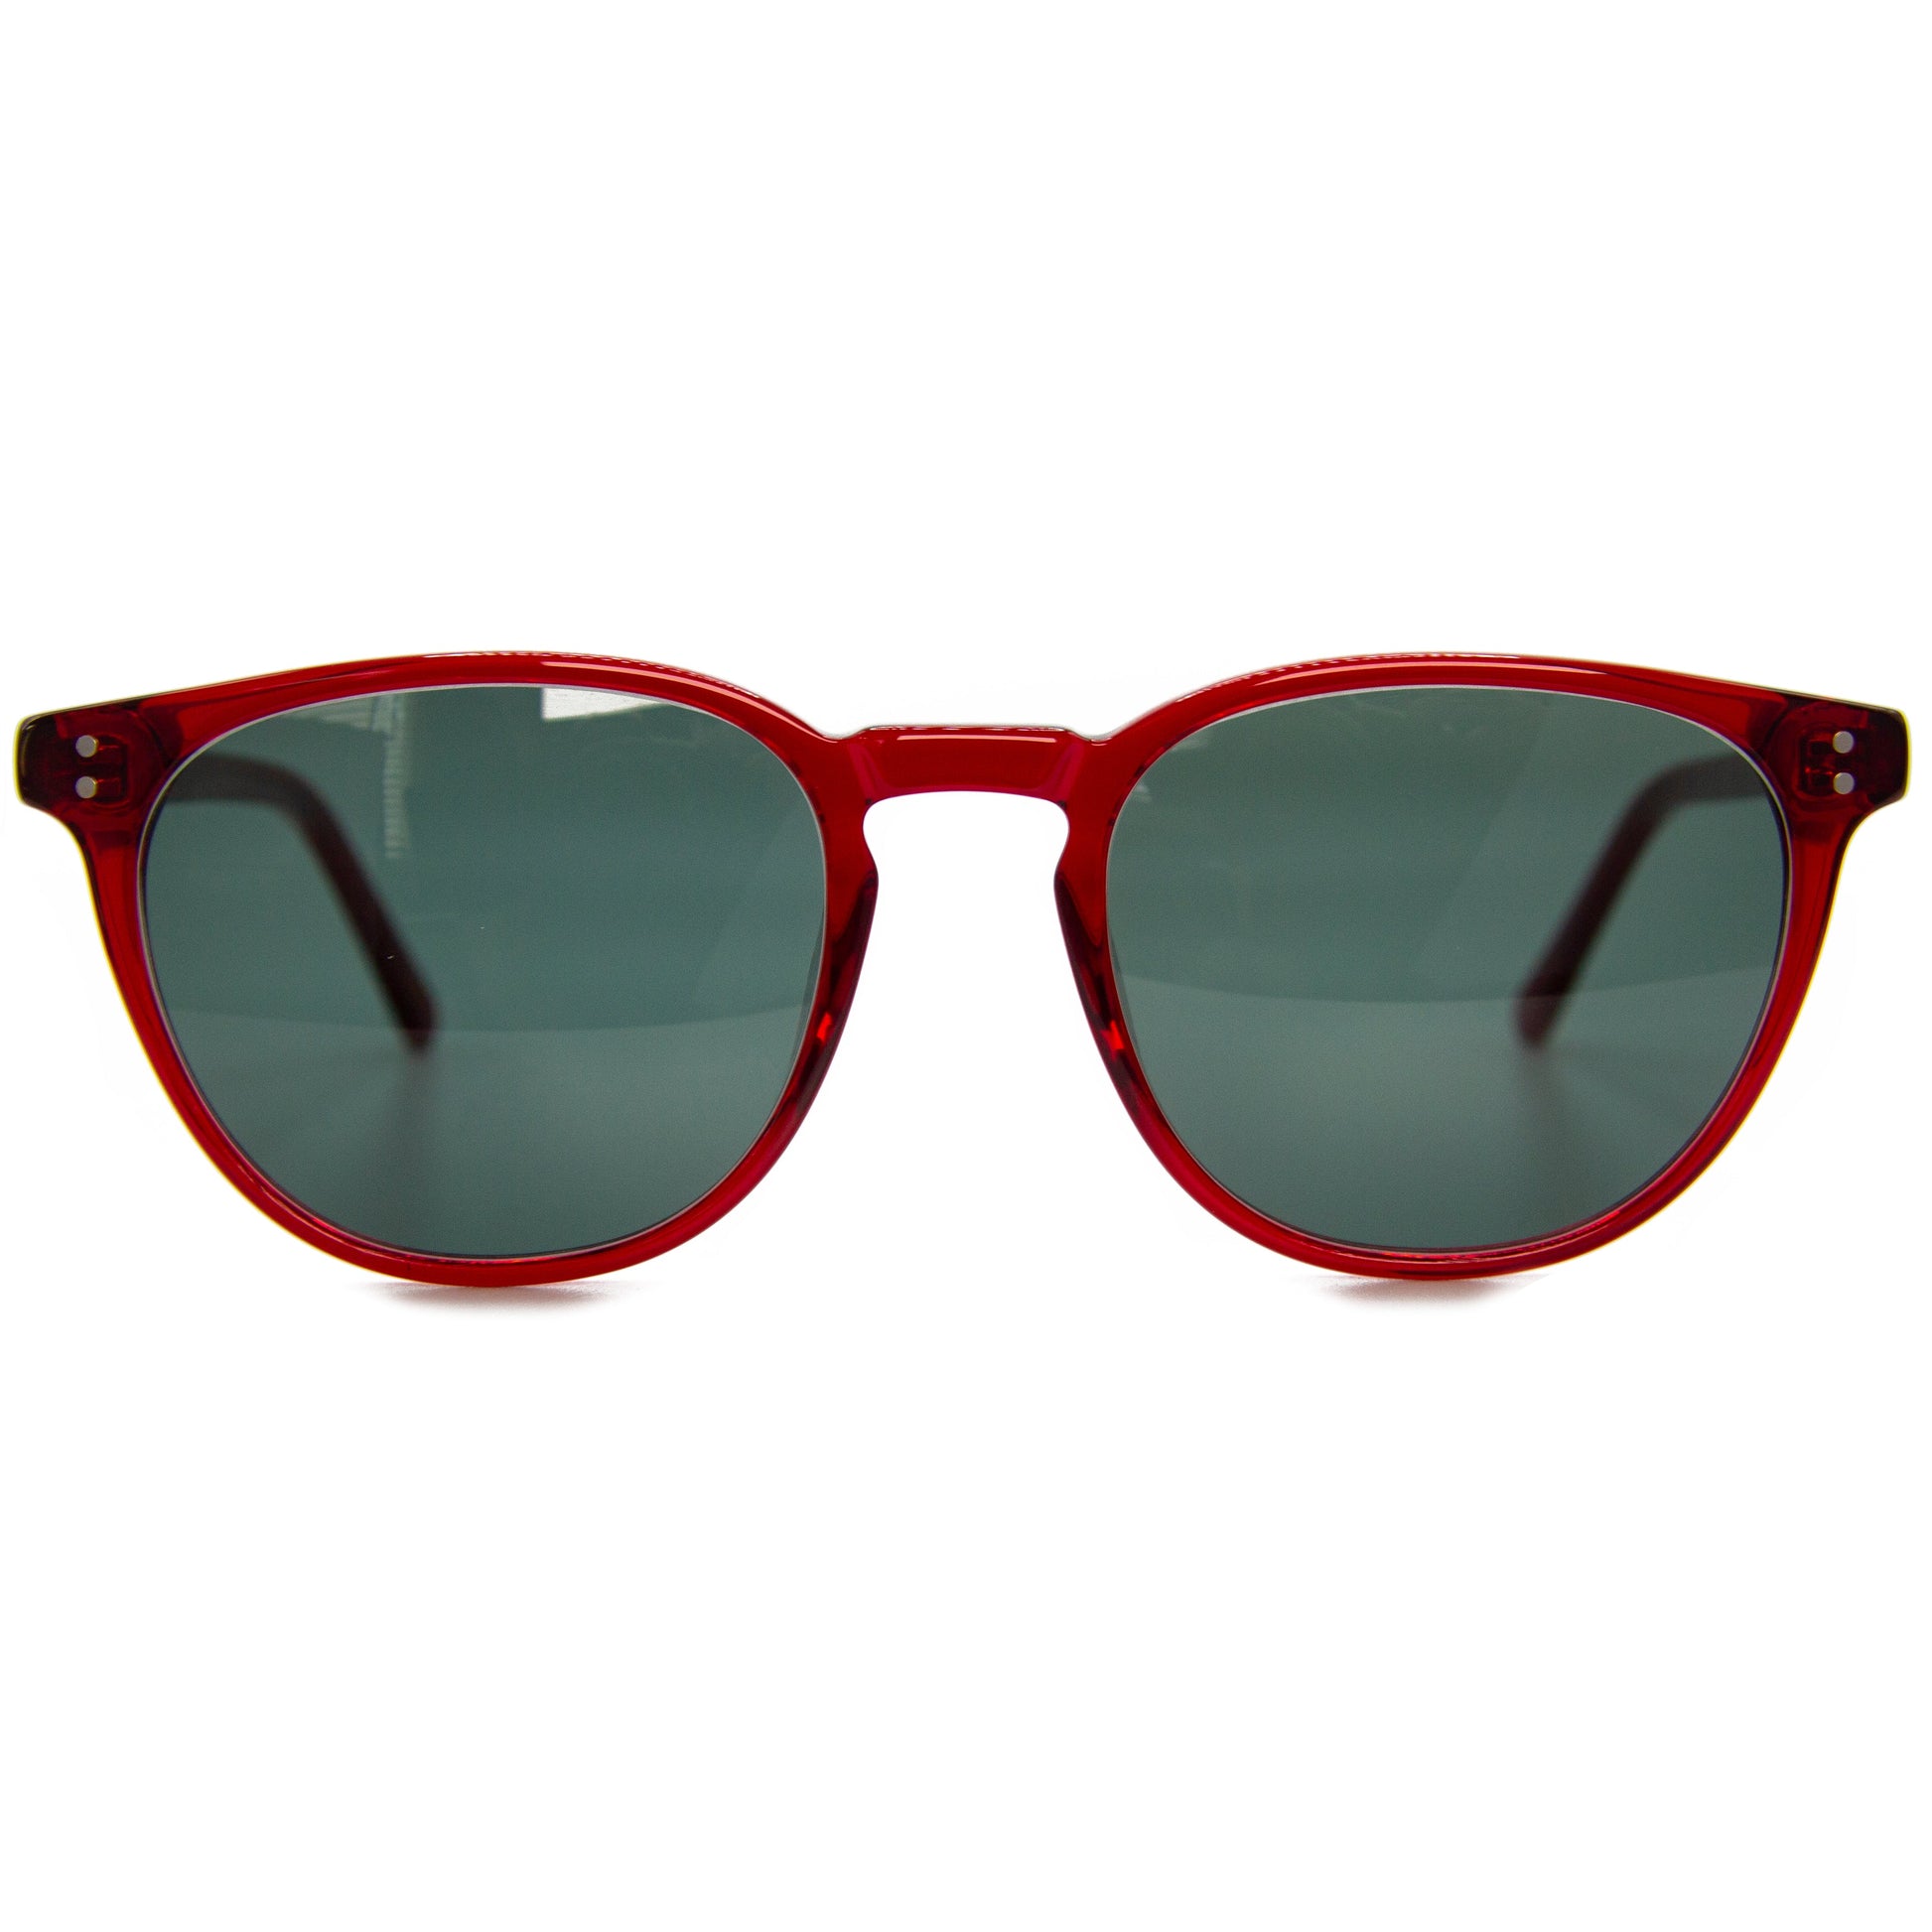 3 brothers - Ant - Red - Prescription Sunglasses 